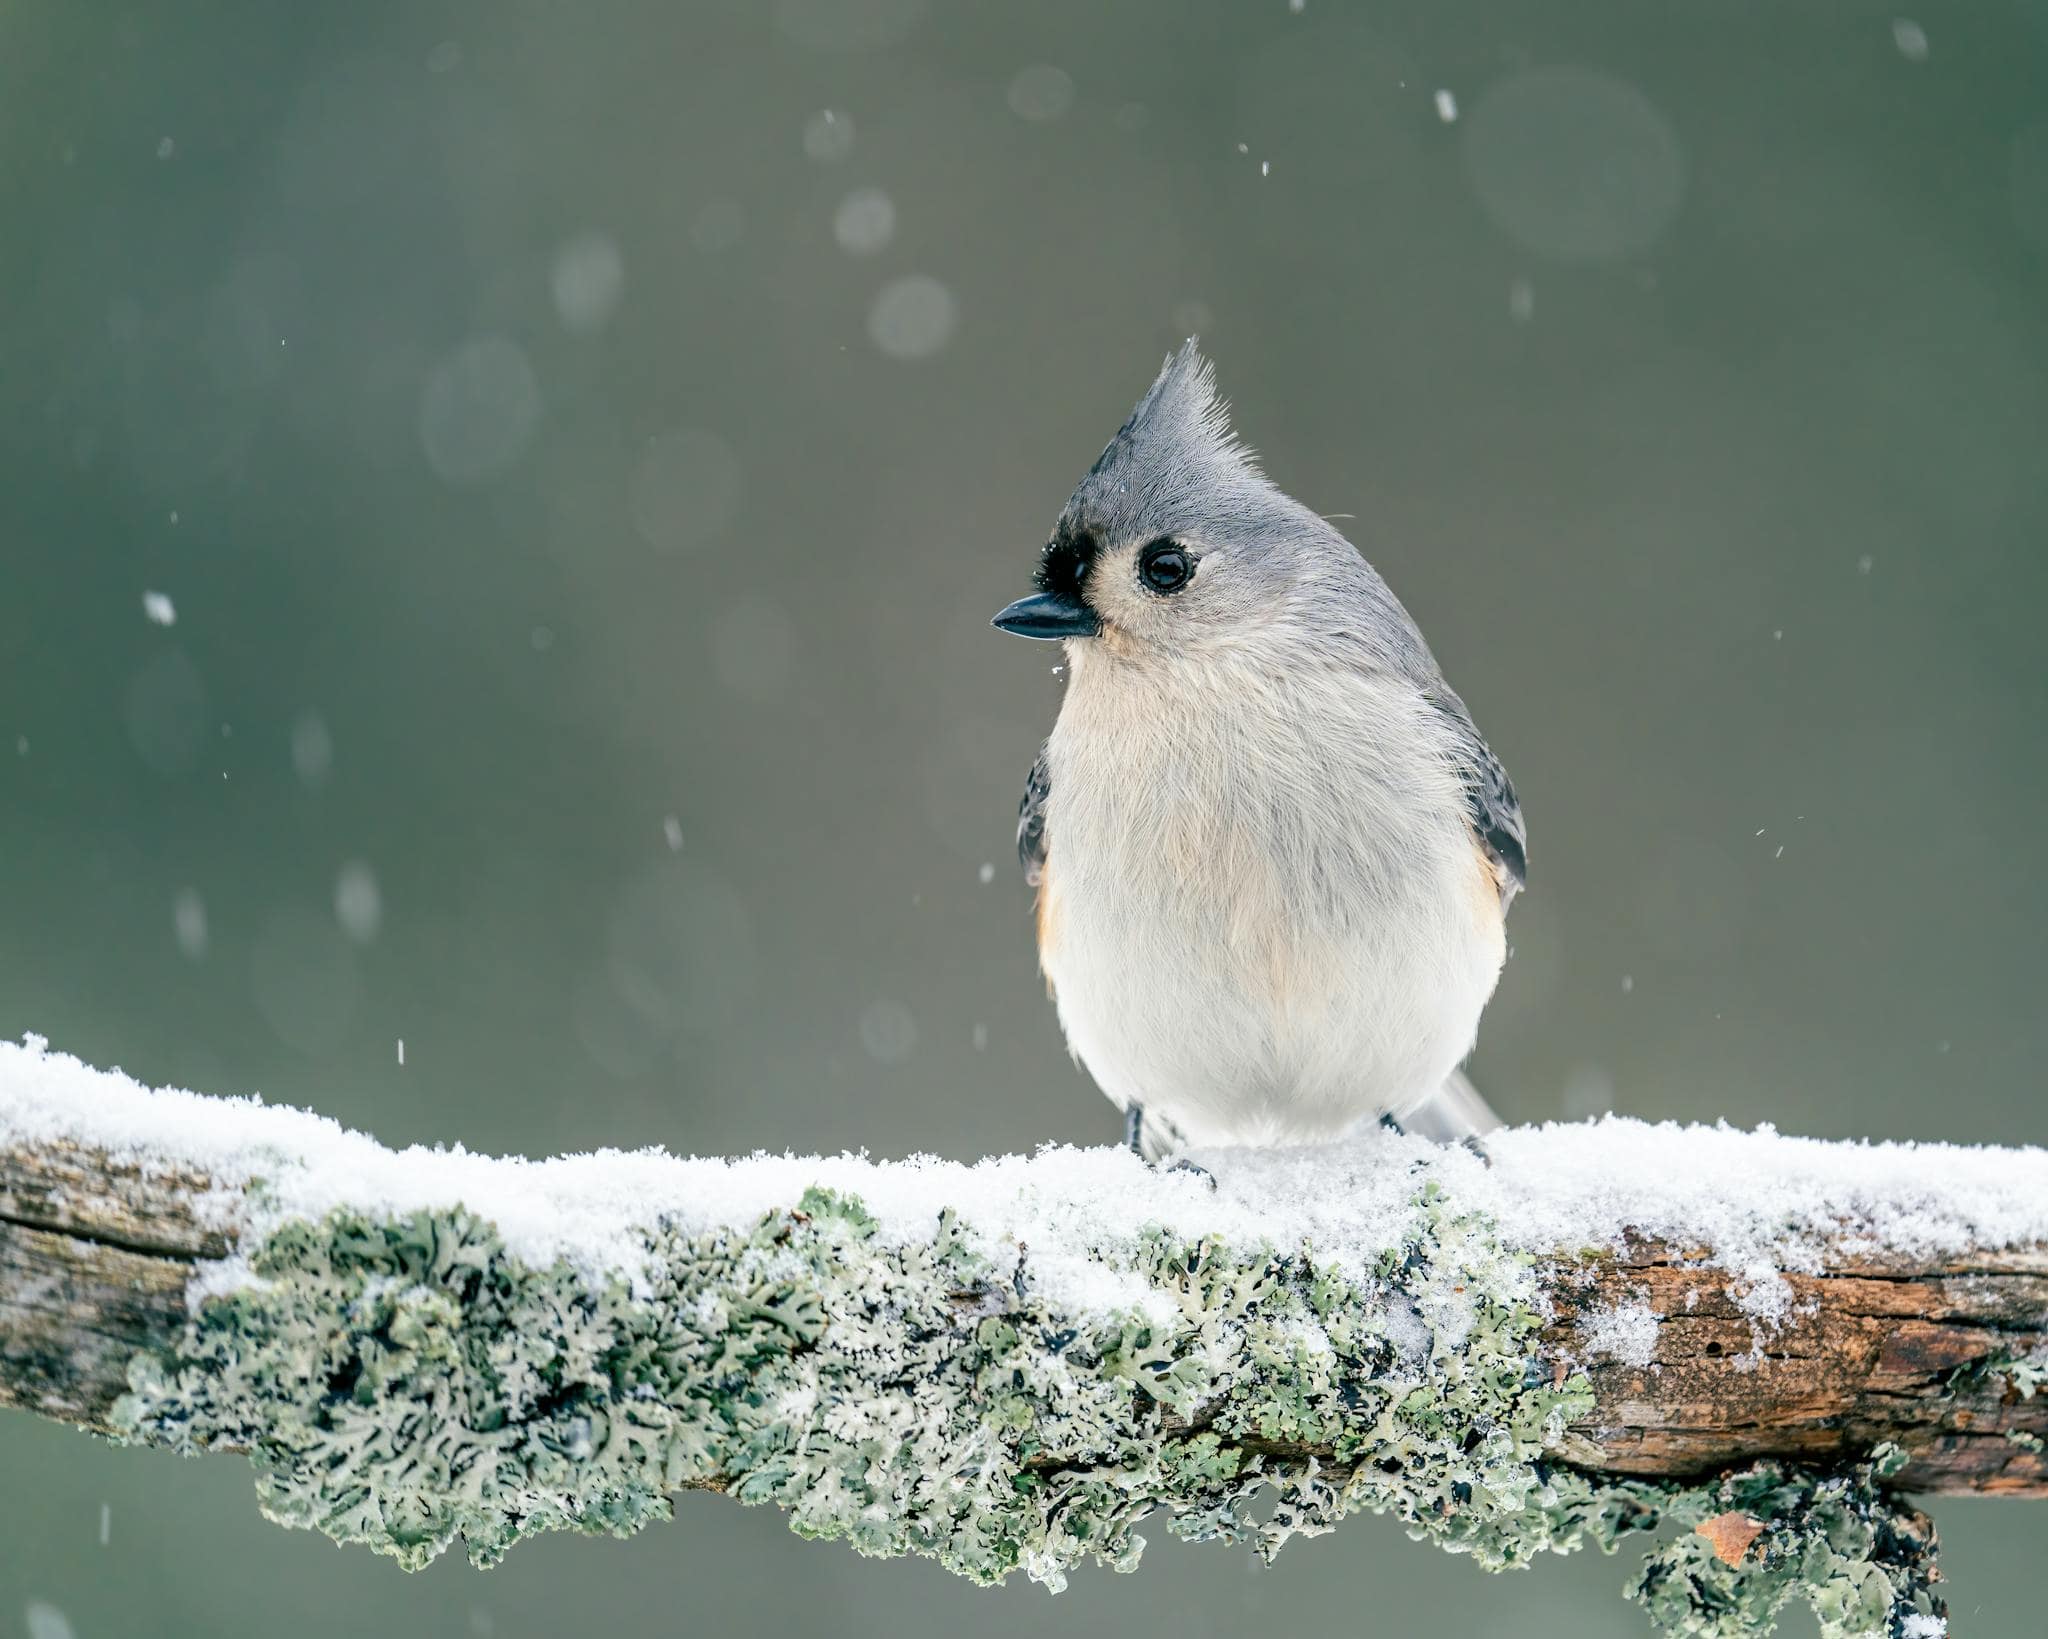 Closeup shot of tiny tufted titmouse with gray crest on head in winter forest under fallen snow